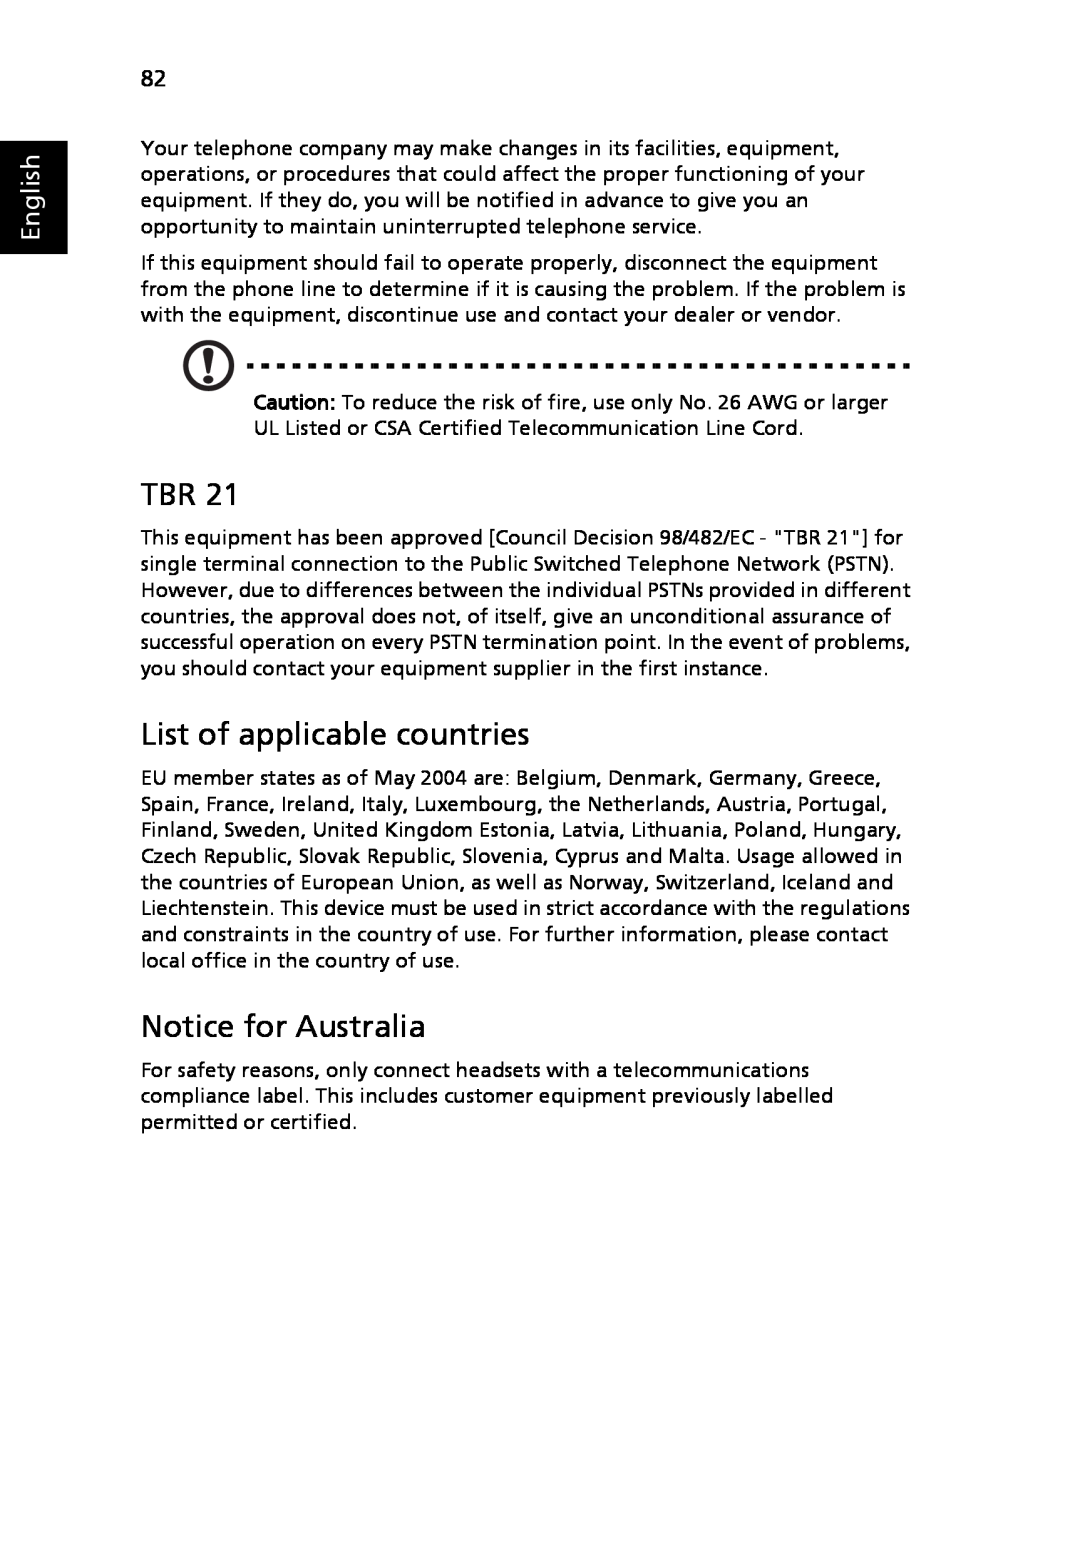 Acer 5410 Series, 5010 Series manual List of applicable countries, Notice for Australia, English 